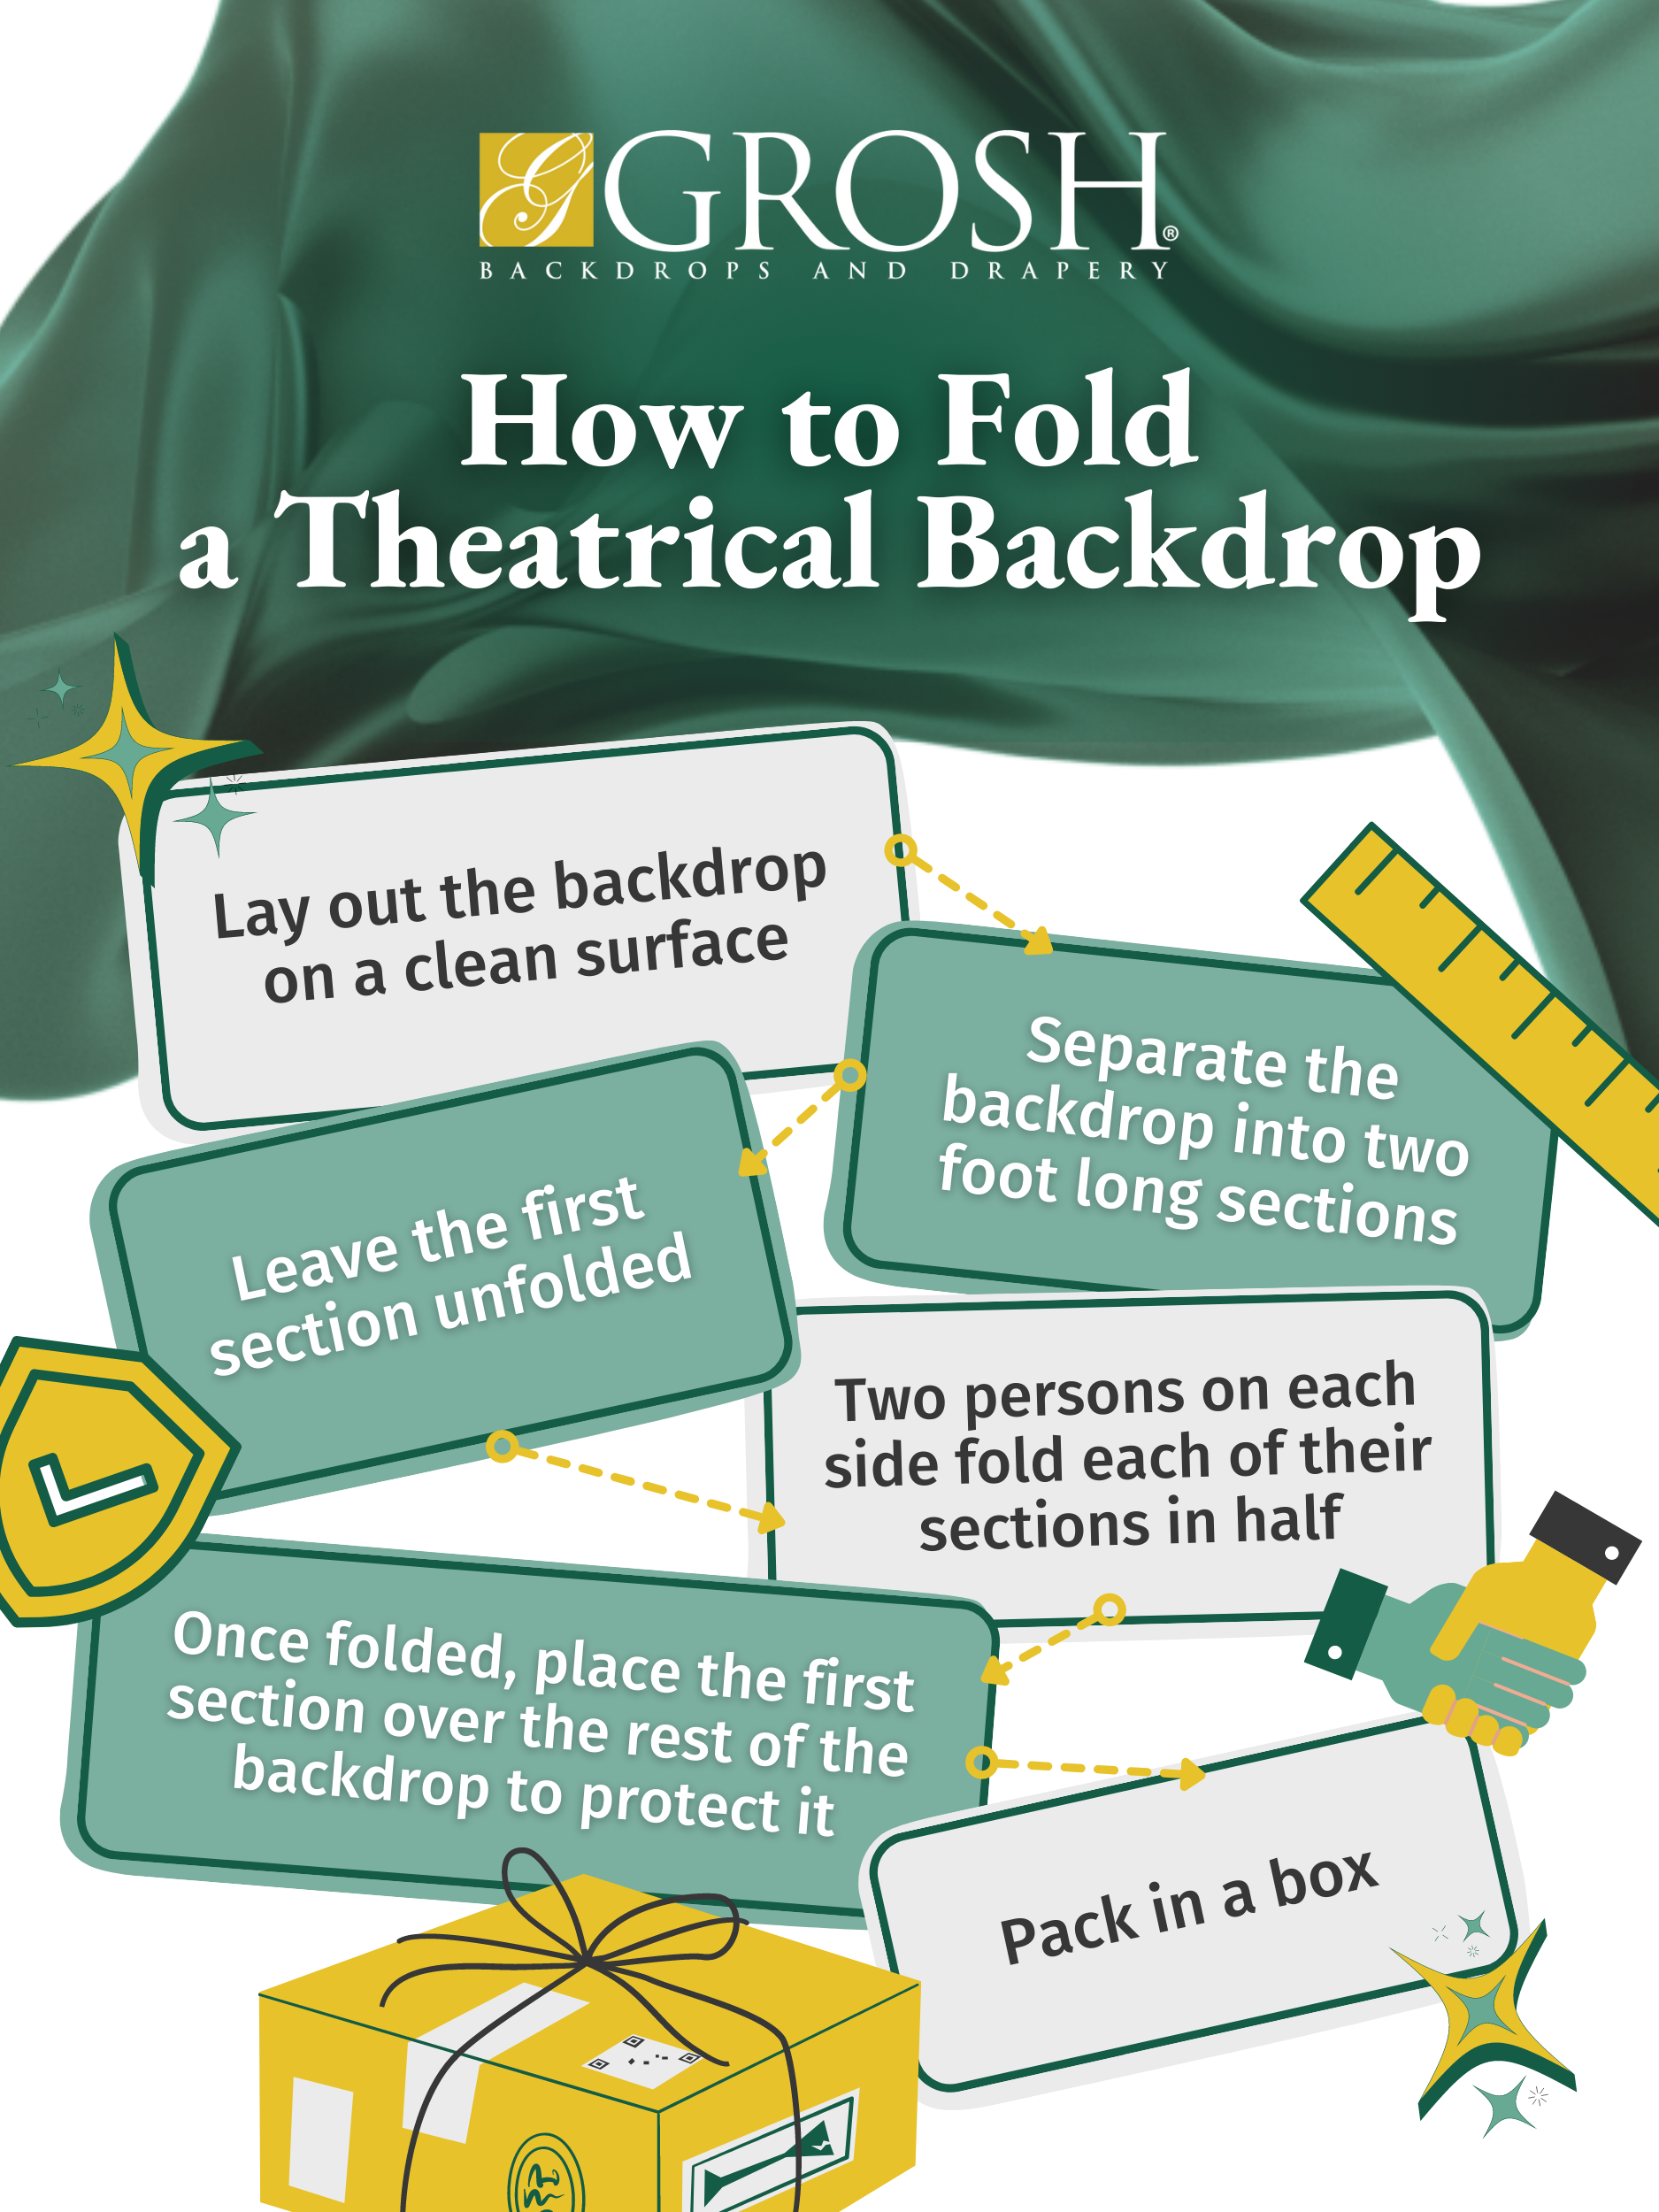 Fold Theatrical Backdrop Infographic 